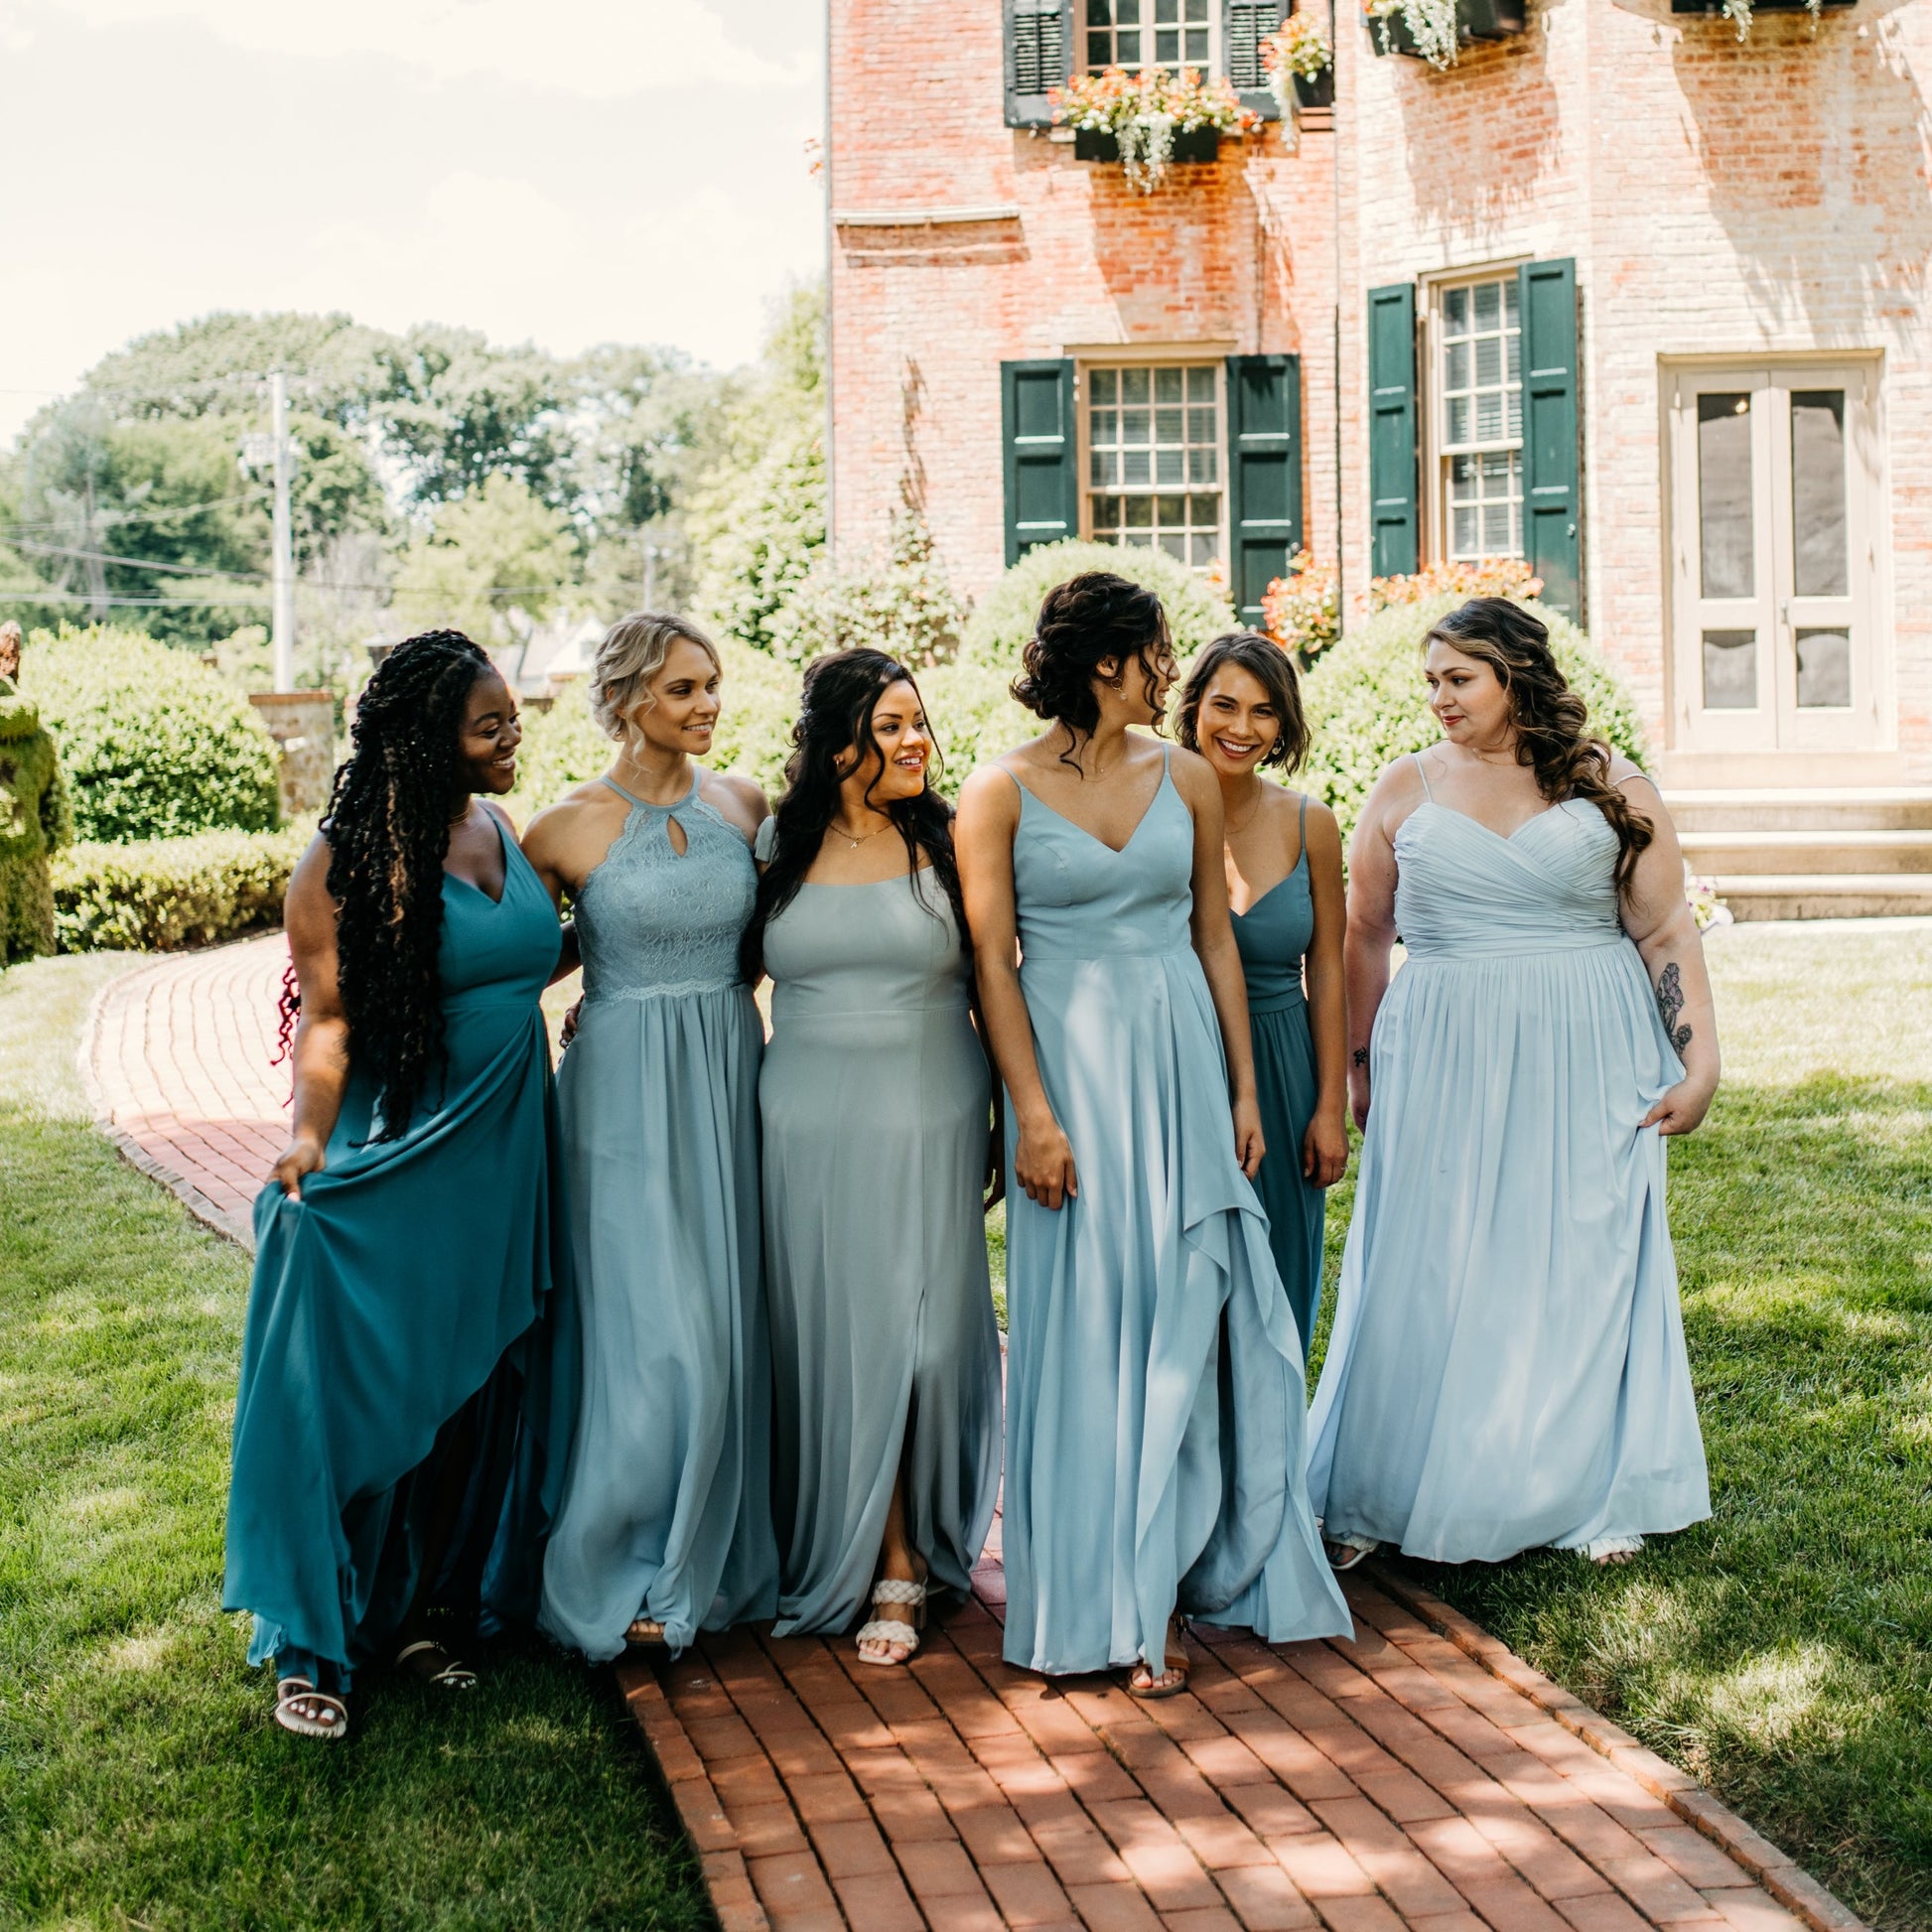 Jess (left) and Hope (third fromright) wear the Alyssa Dress